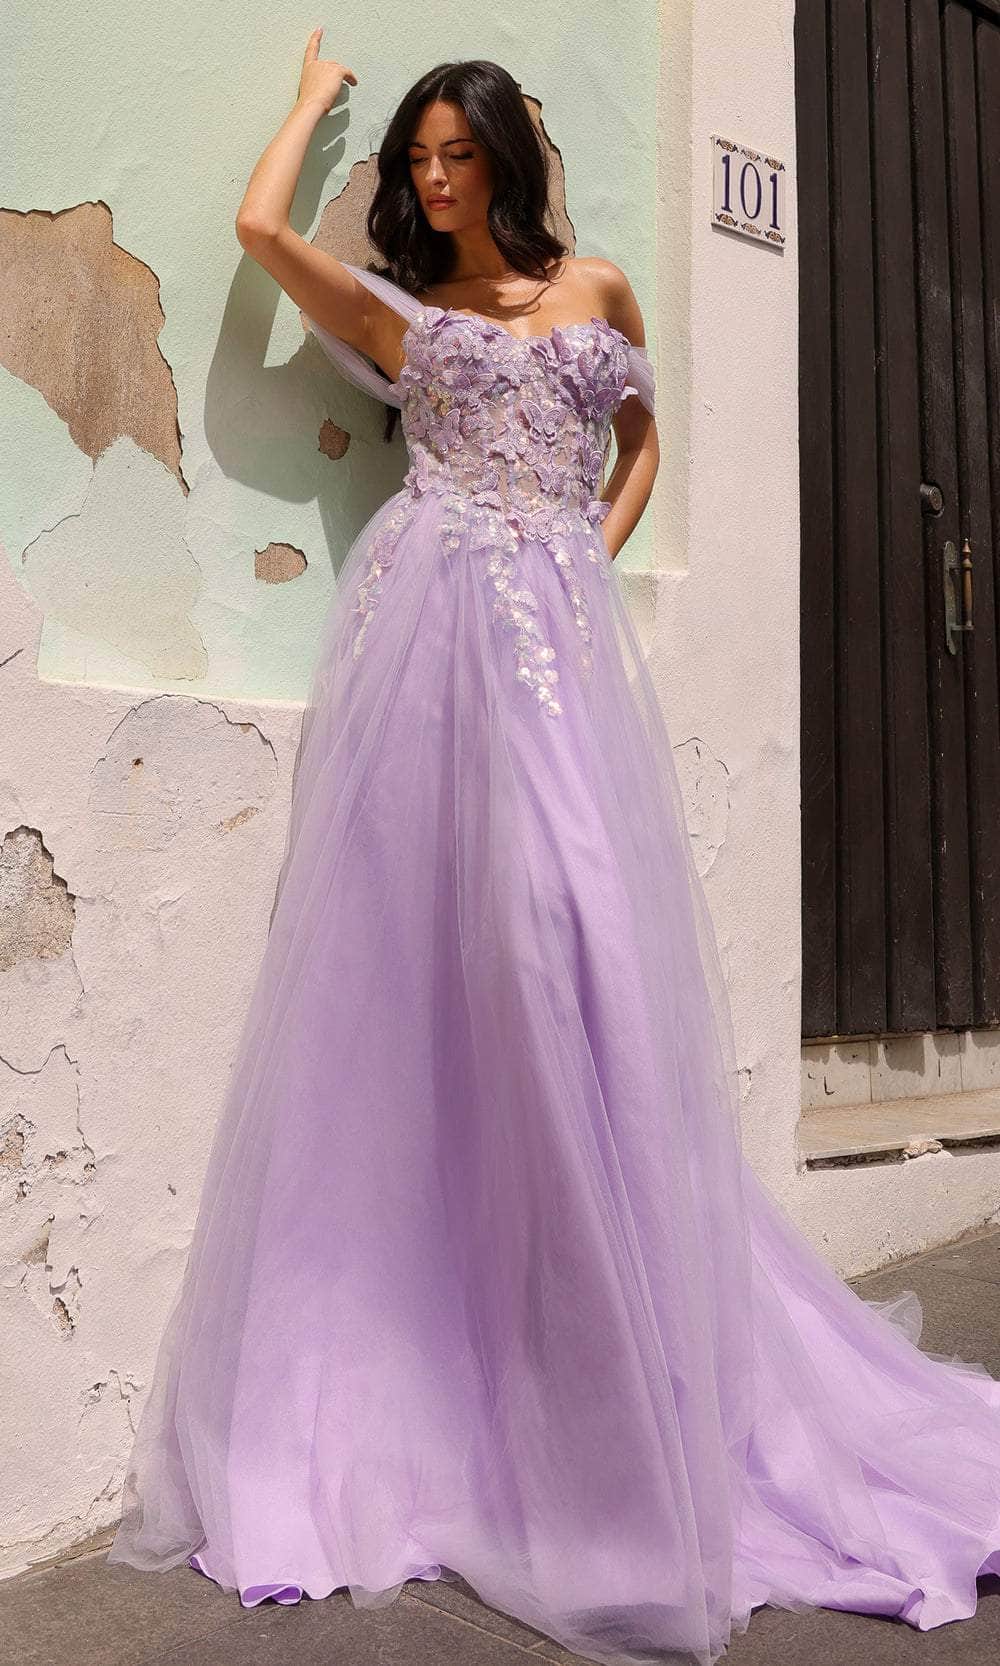 Image of Nox Anabel J1324 - 3D Butterfly Embellished Corset Bodice Prom Gown